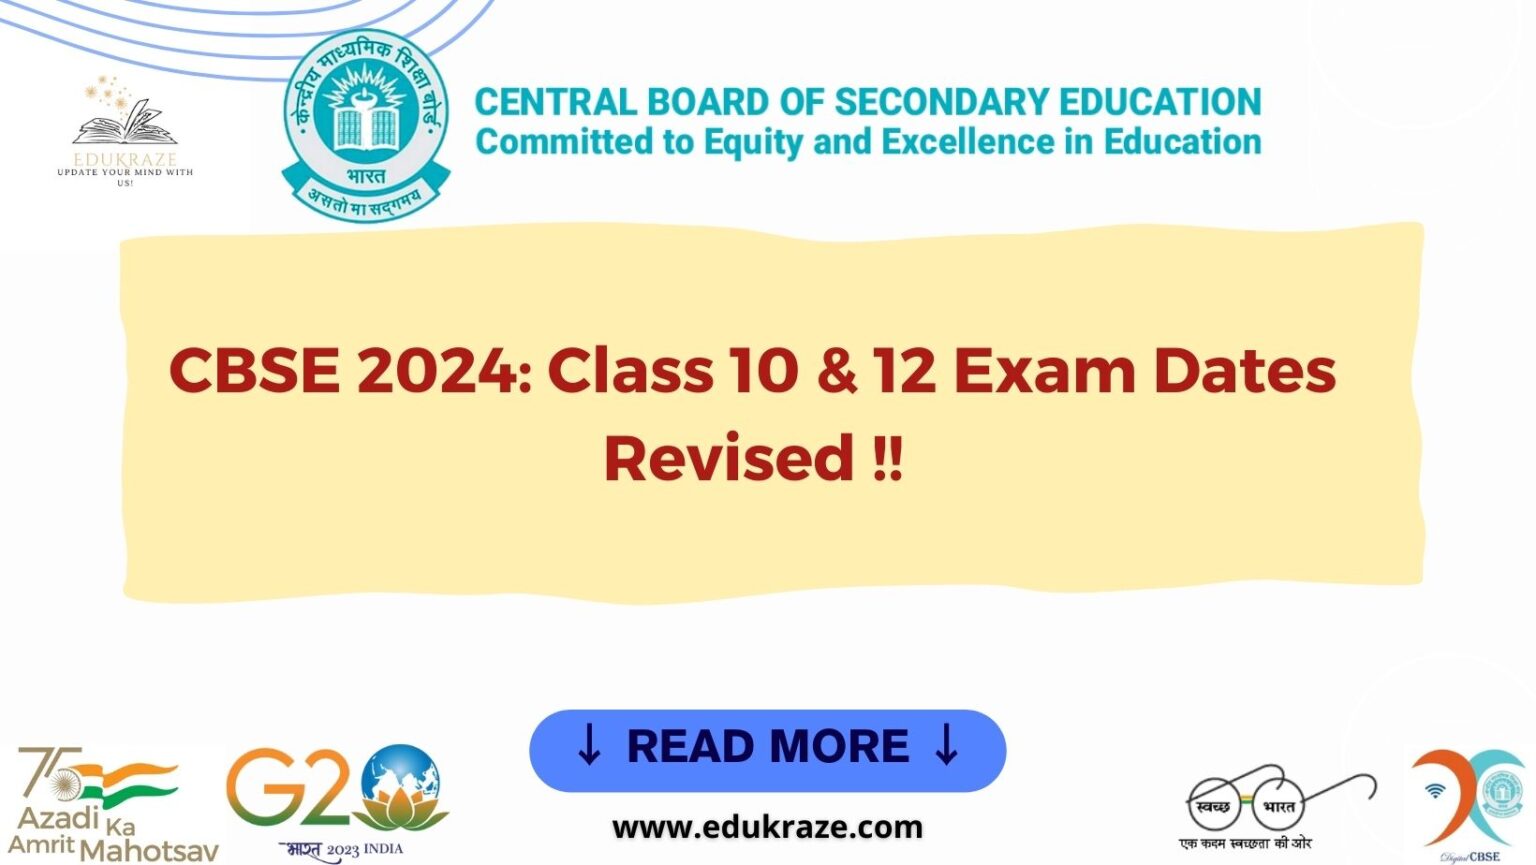 CBSE Date Sheet 2024 Revised Changes in Class 10 and 12 Exam Dates